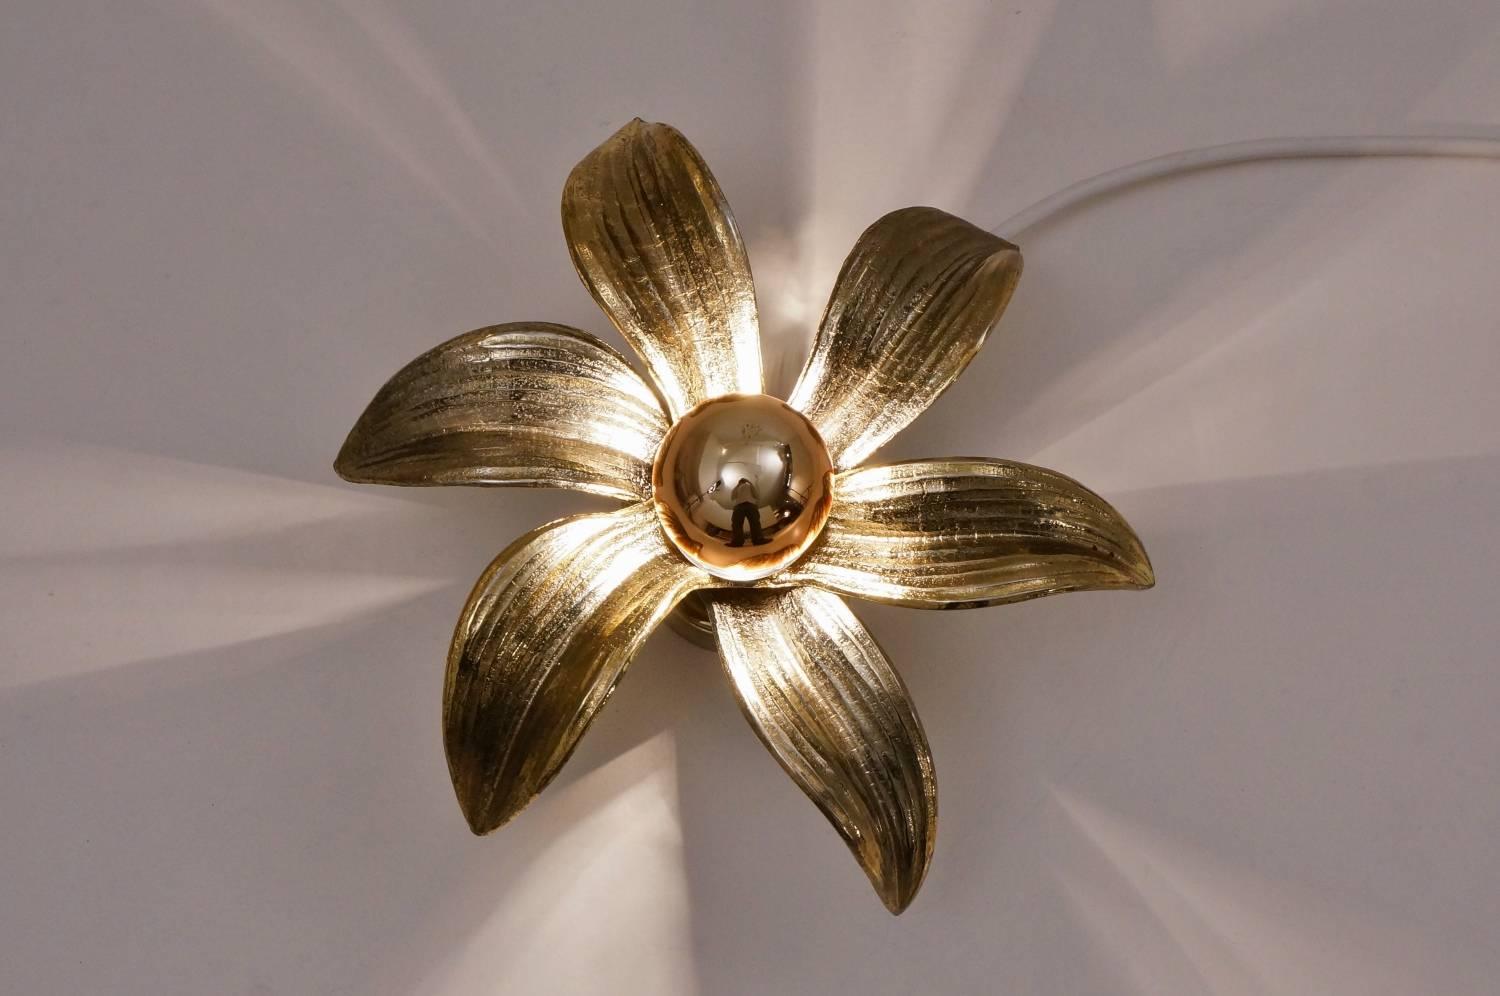 Late 20th Century Brass Flower Wall Lights, a Pair by Massive, 1970s, Belgian, Willy Daro Style